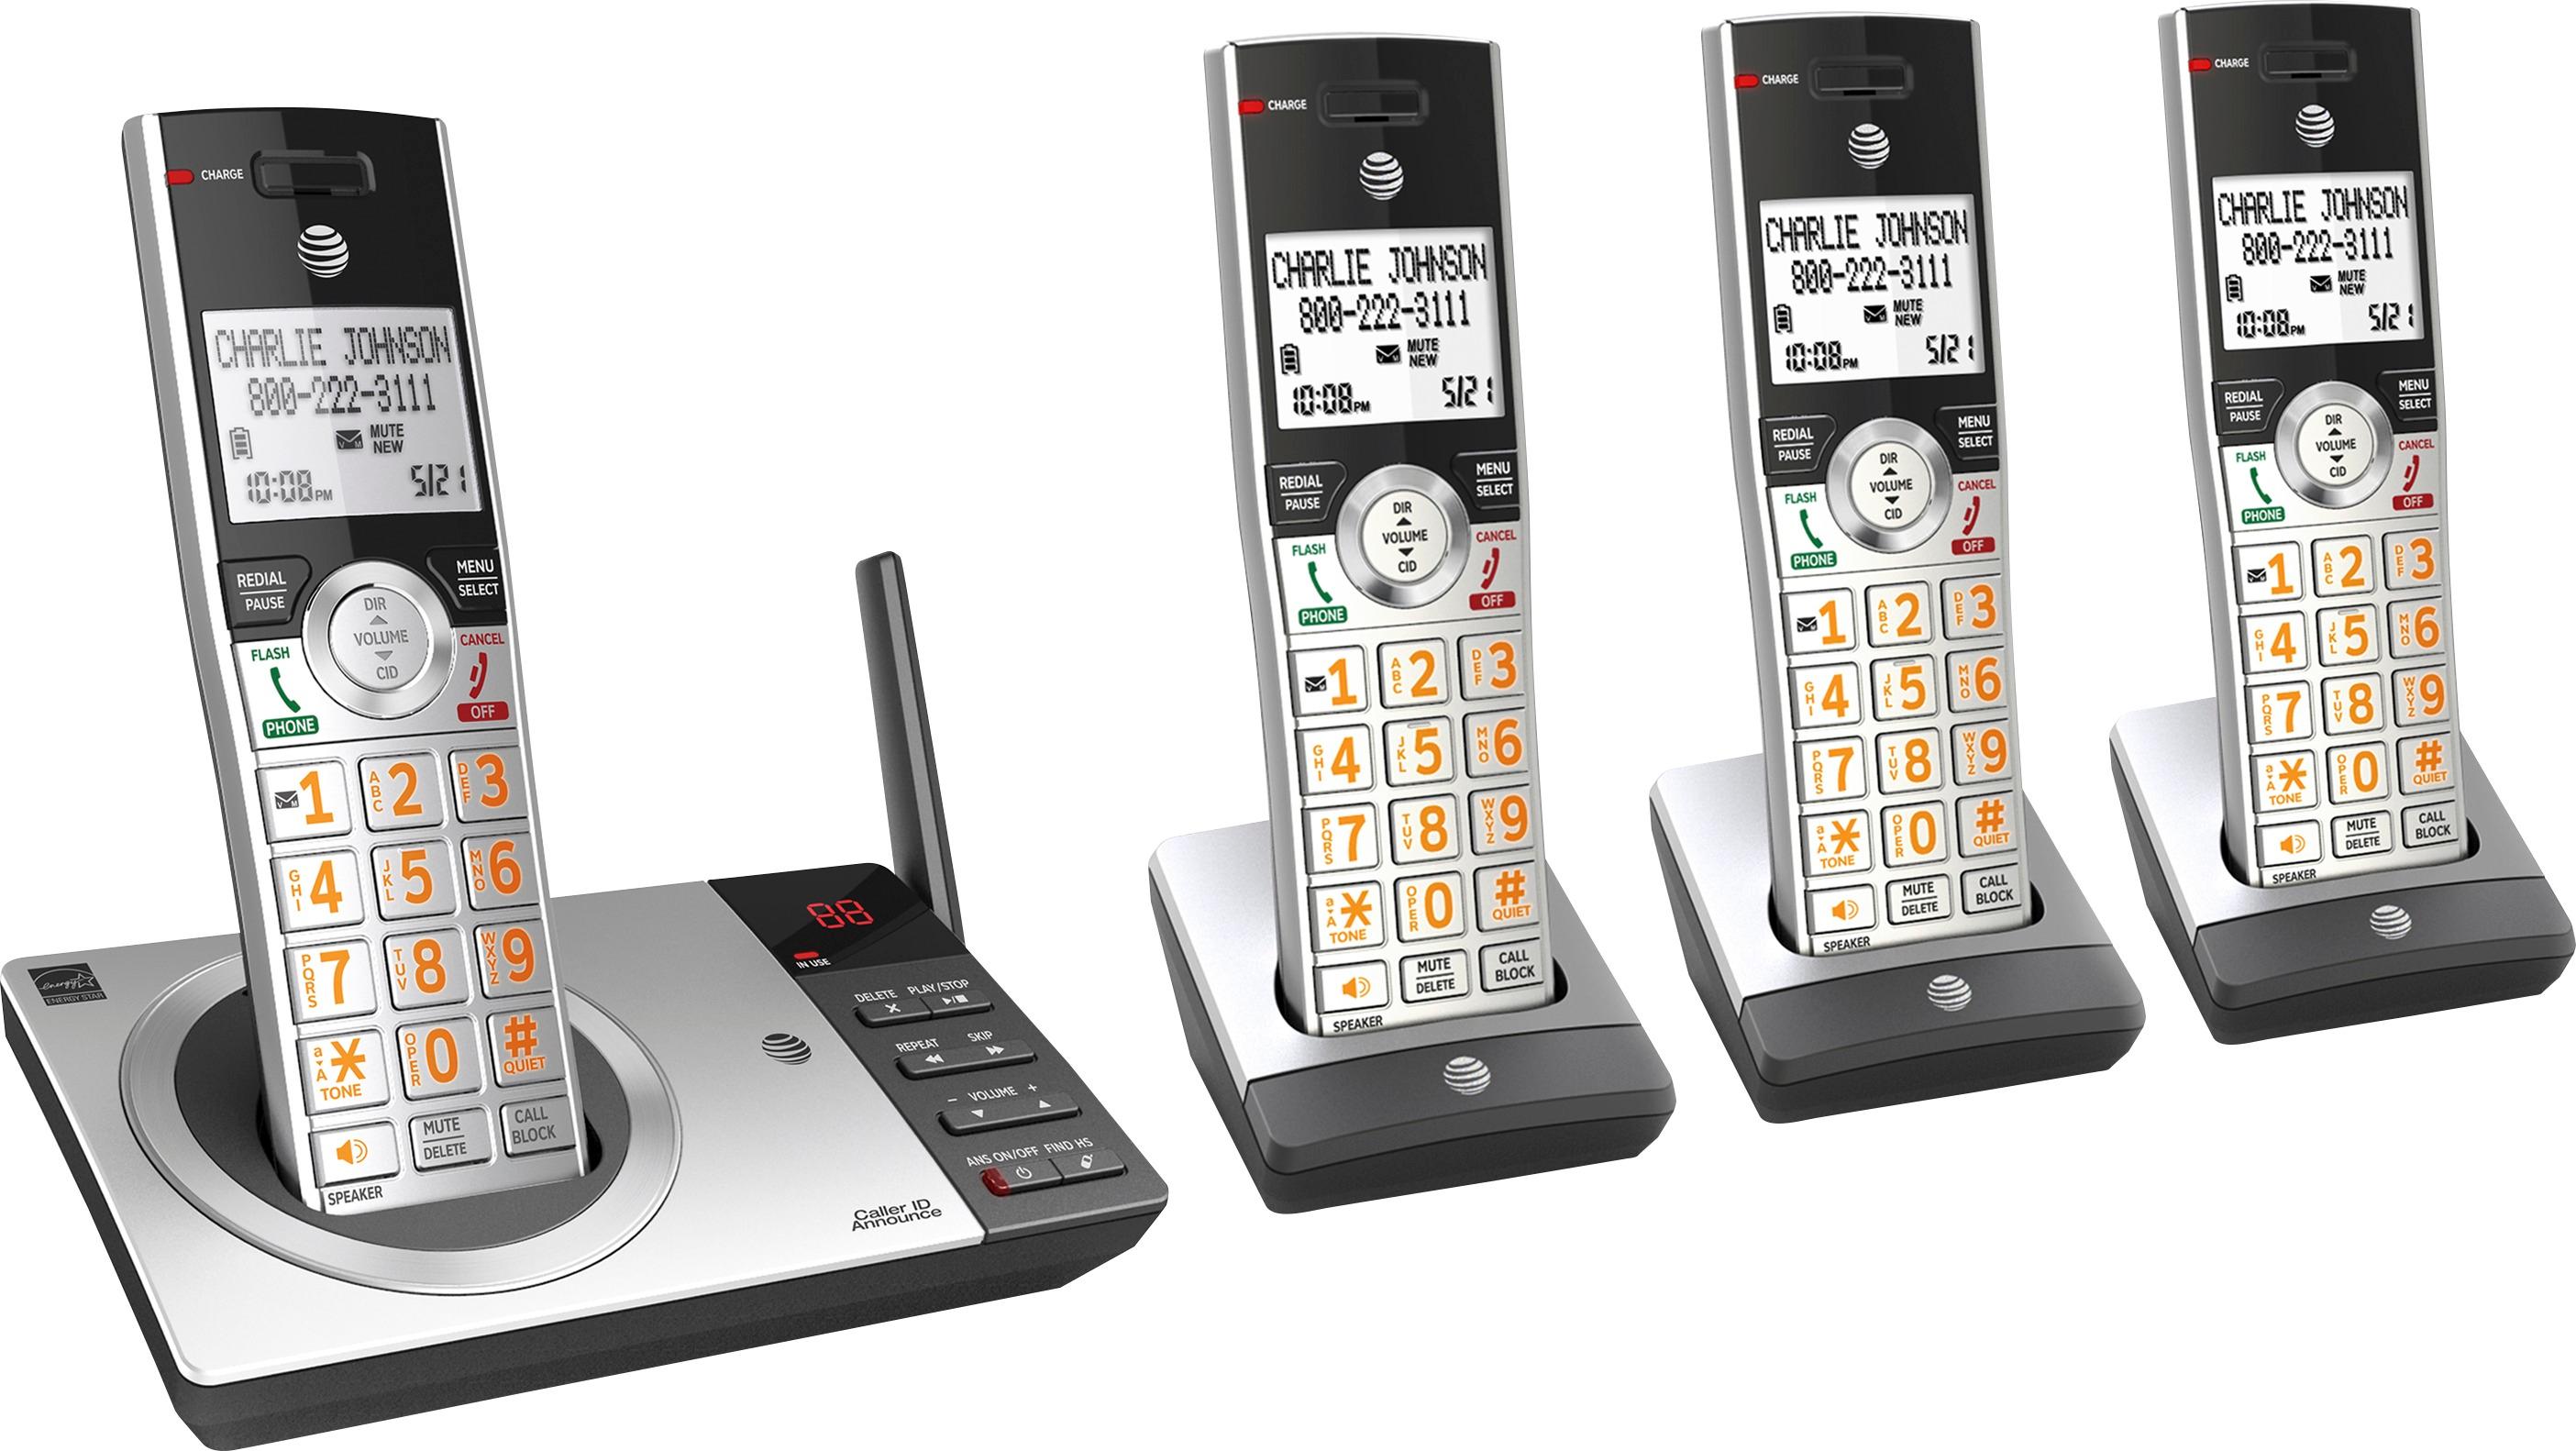 AT&T CL82407 DECT 6.0 Expandable Cordless Phone System with Digital